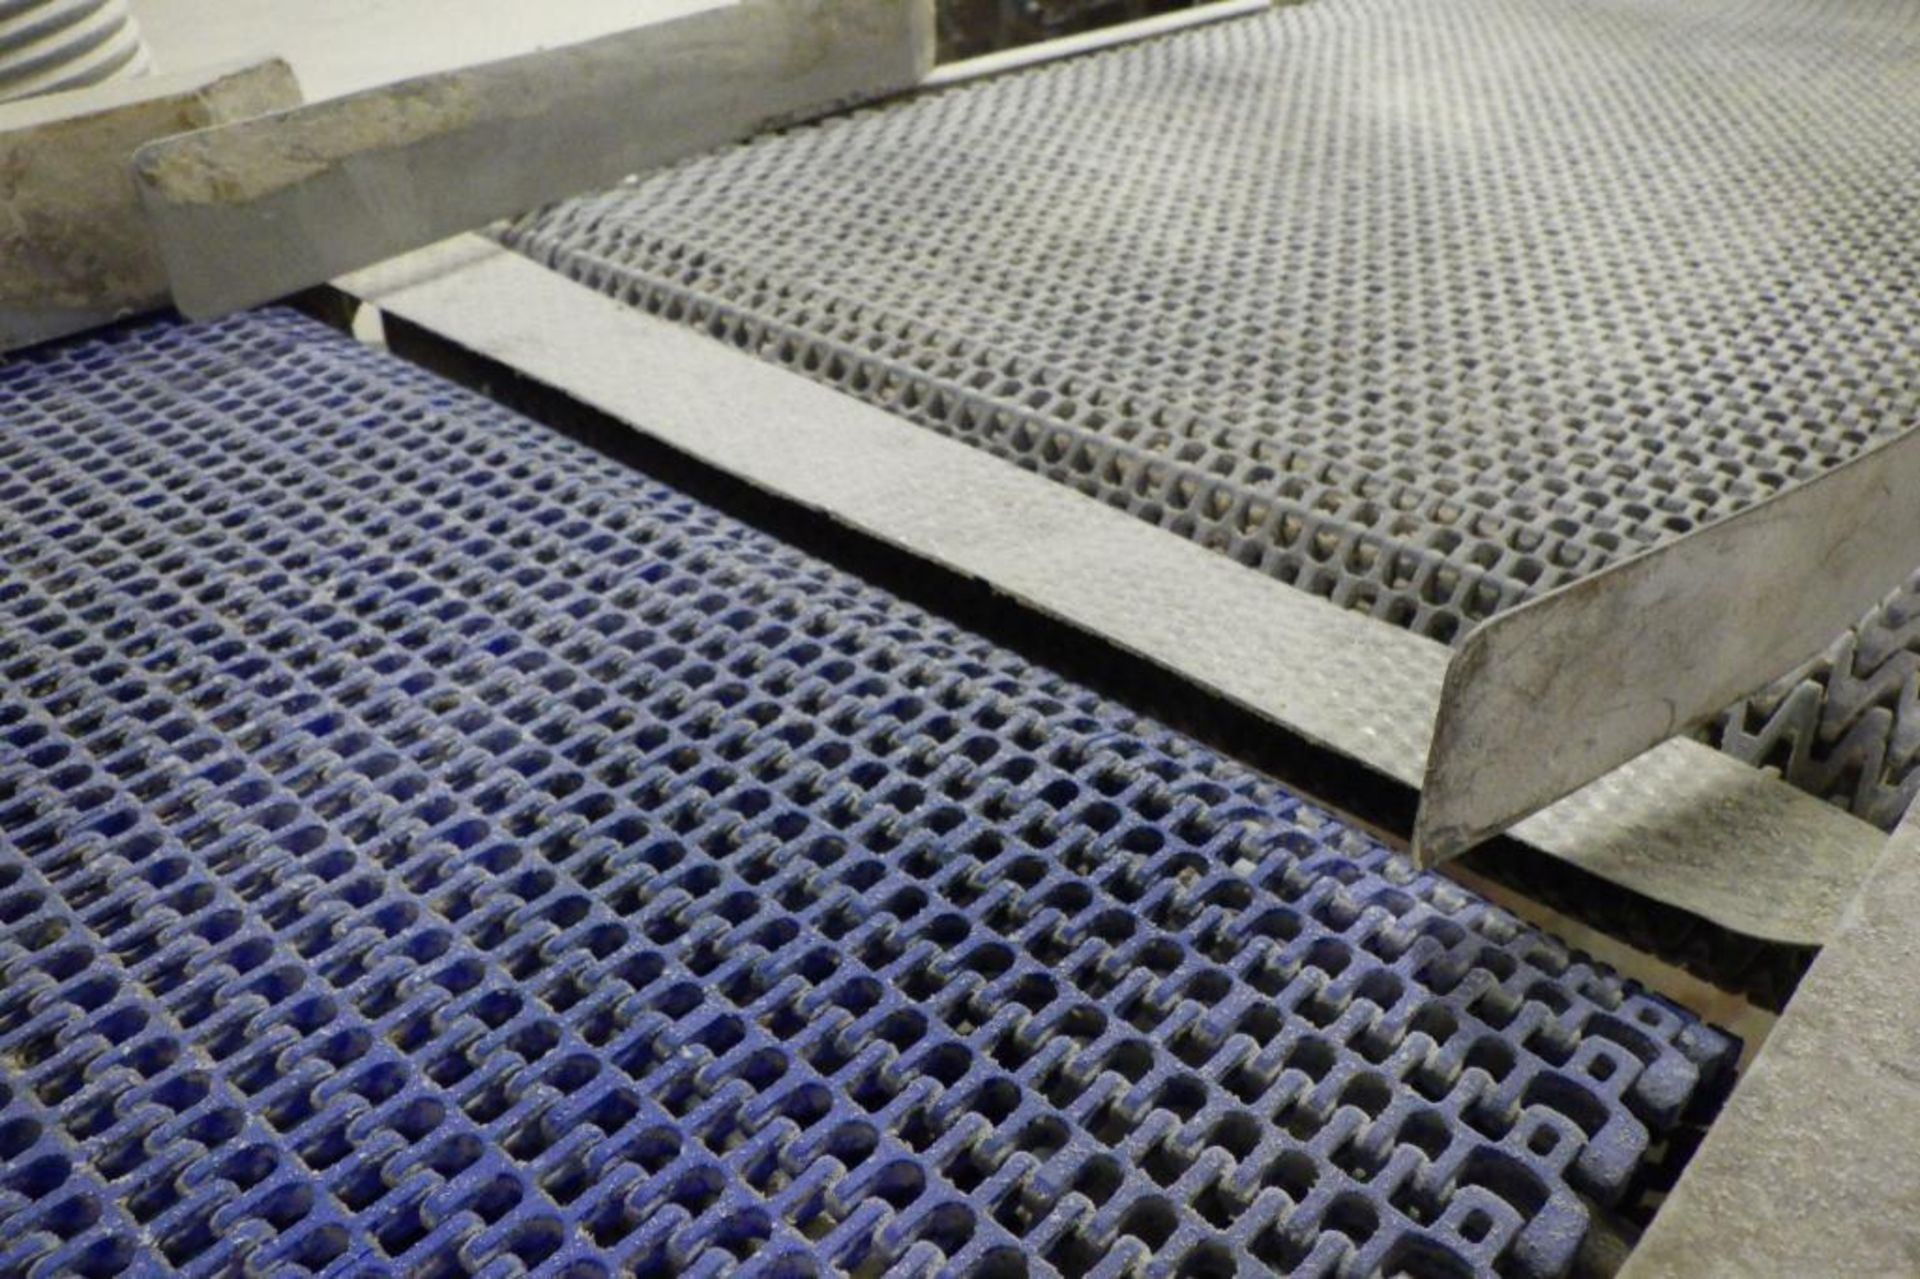 Stewart Systems product conveyor - Image 5 of 7